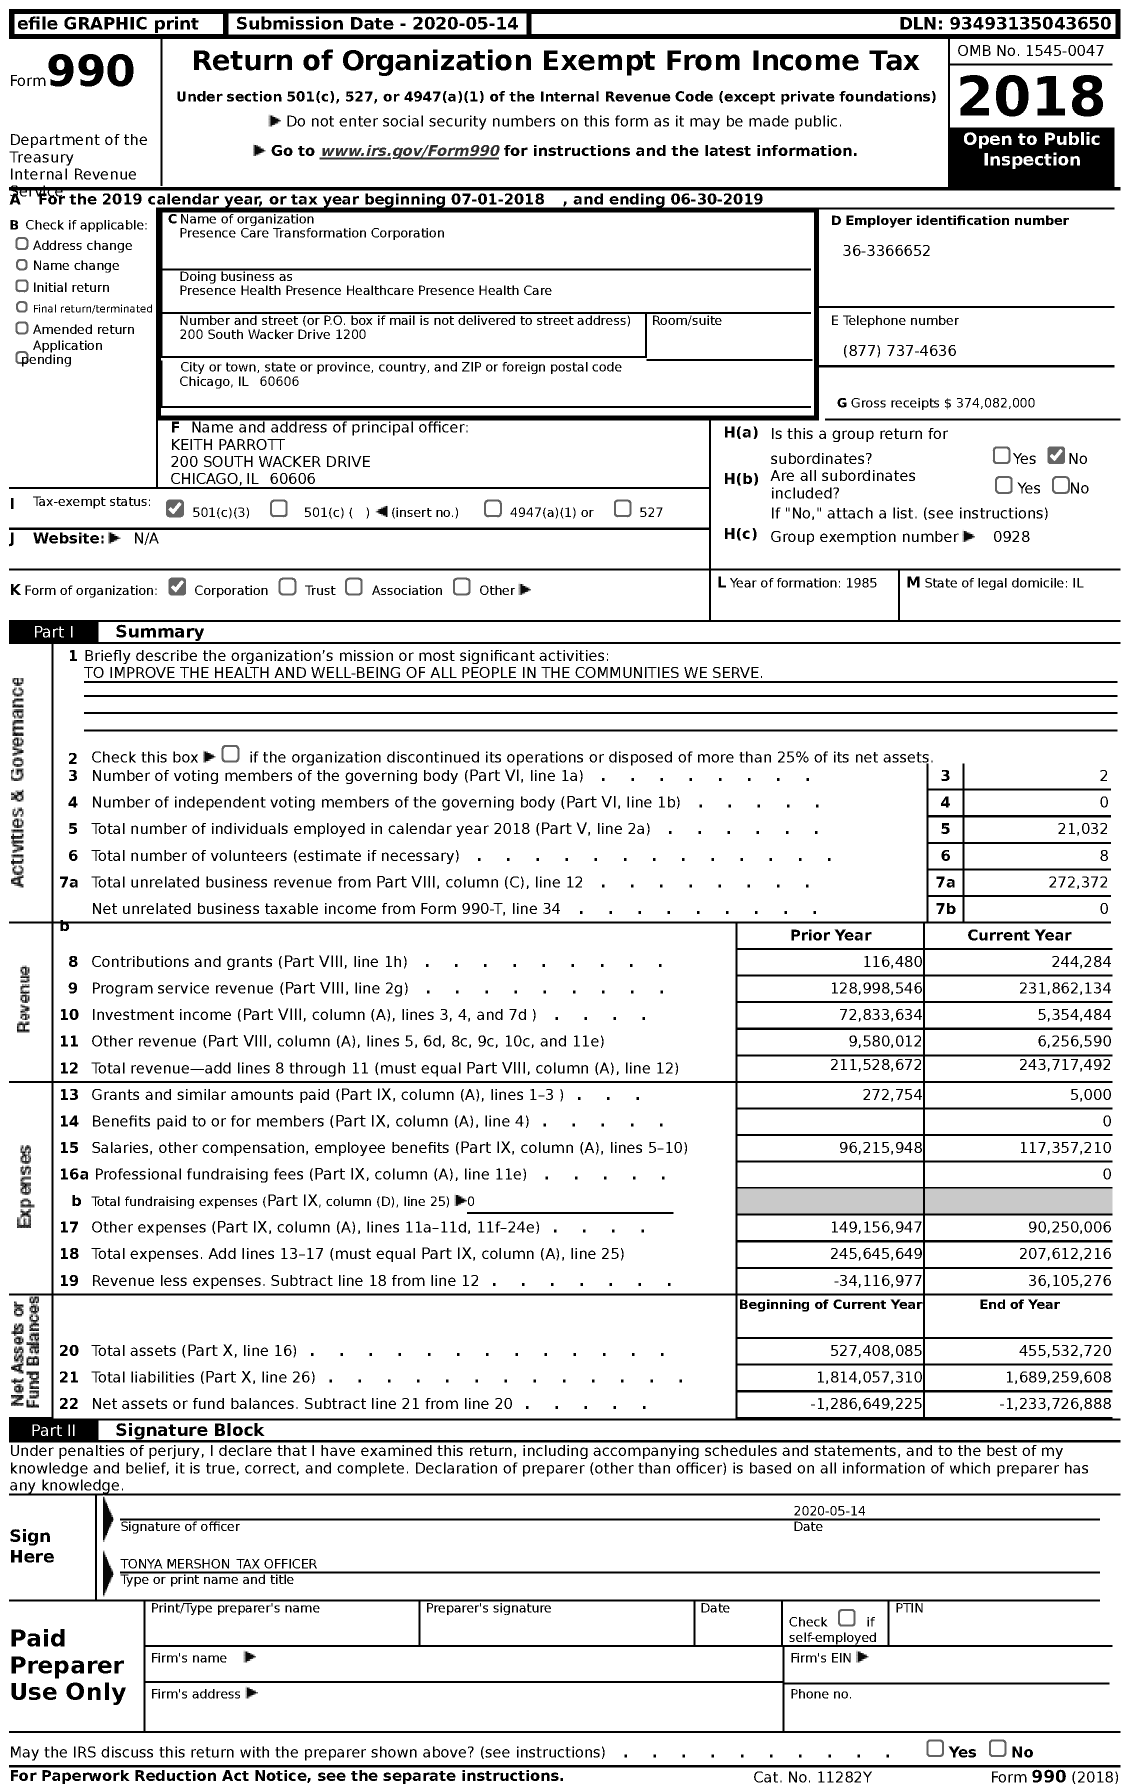 Image of first page of 2018 Form 990 for Presence Health Presence Healthcare Presence Health Care